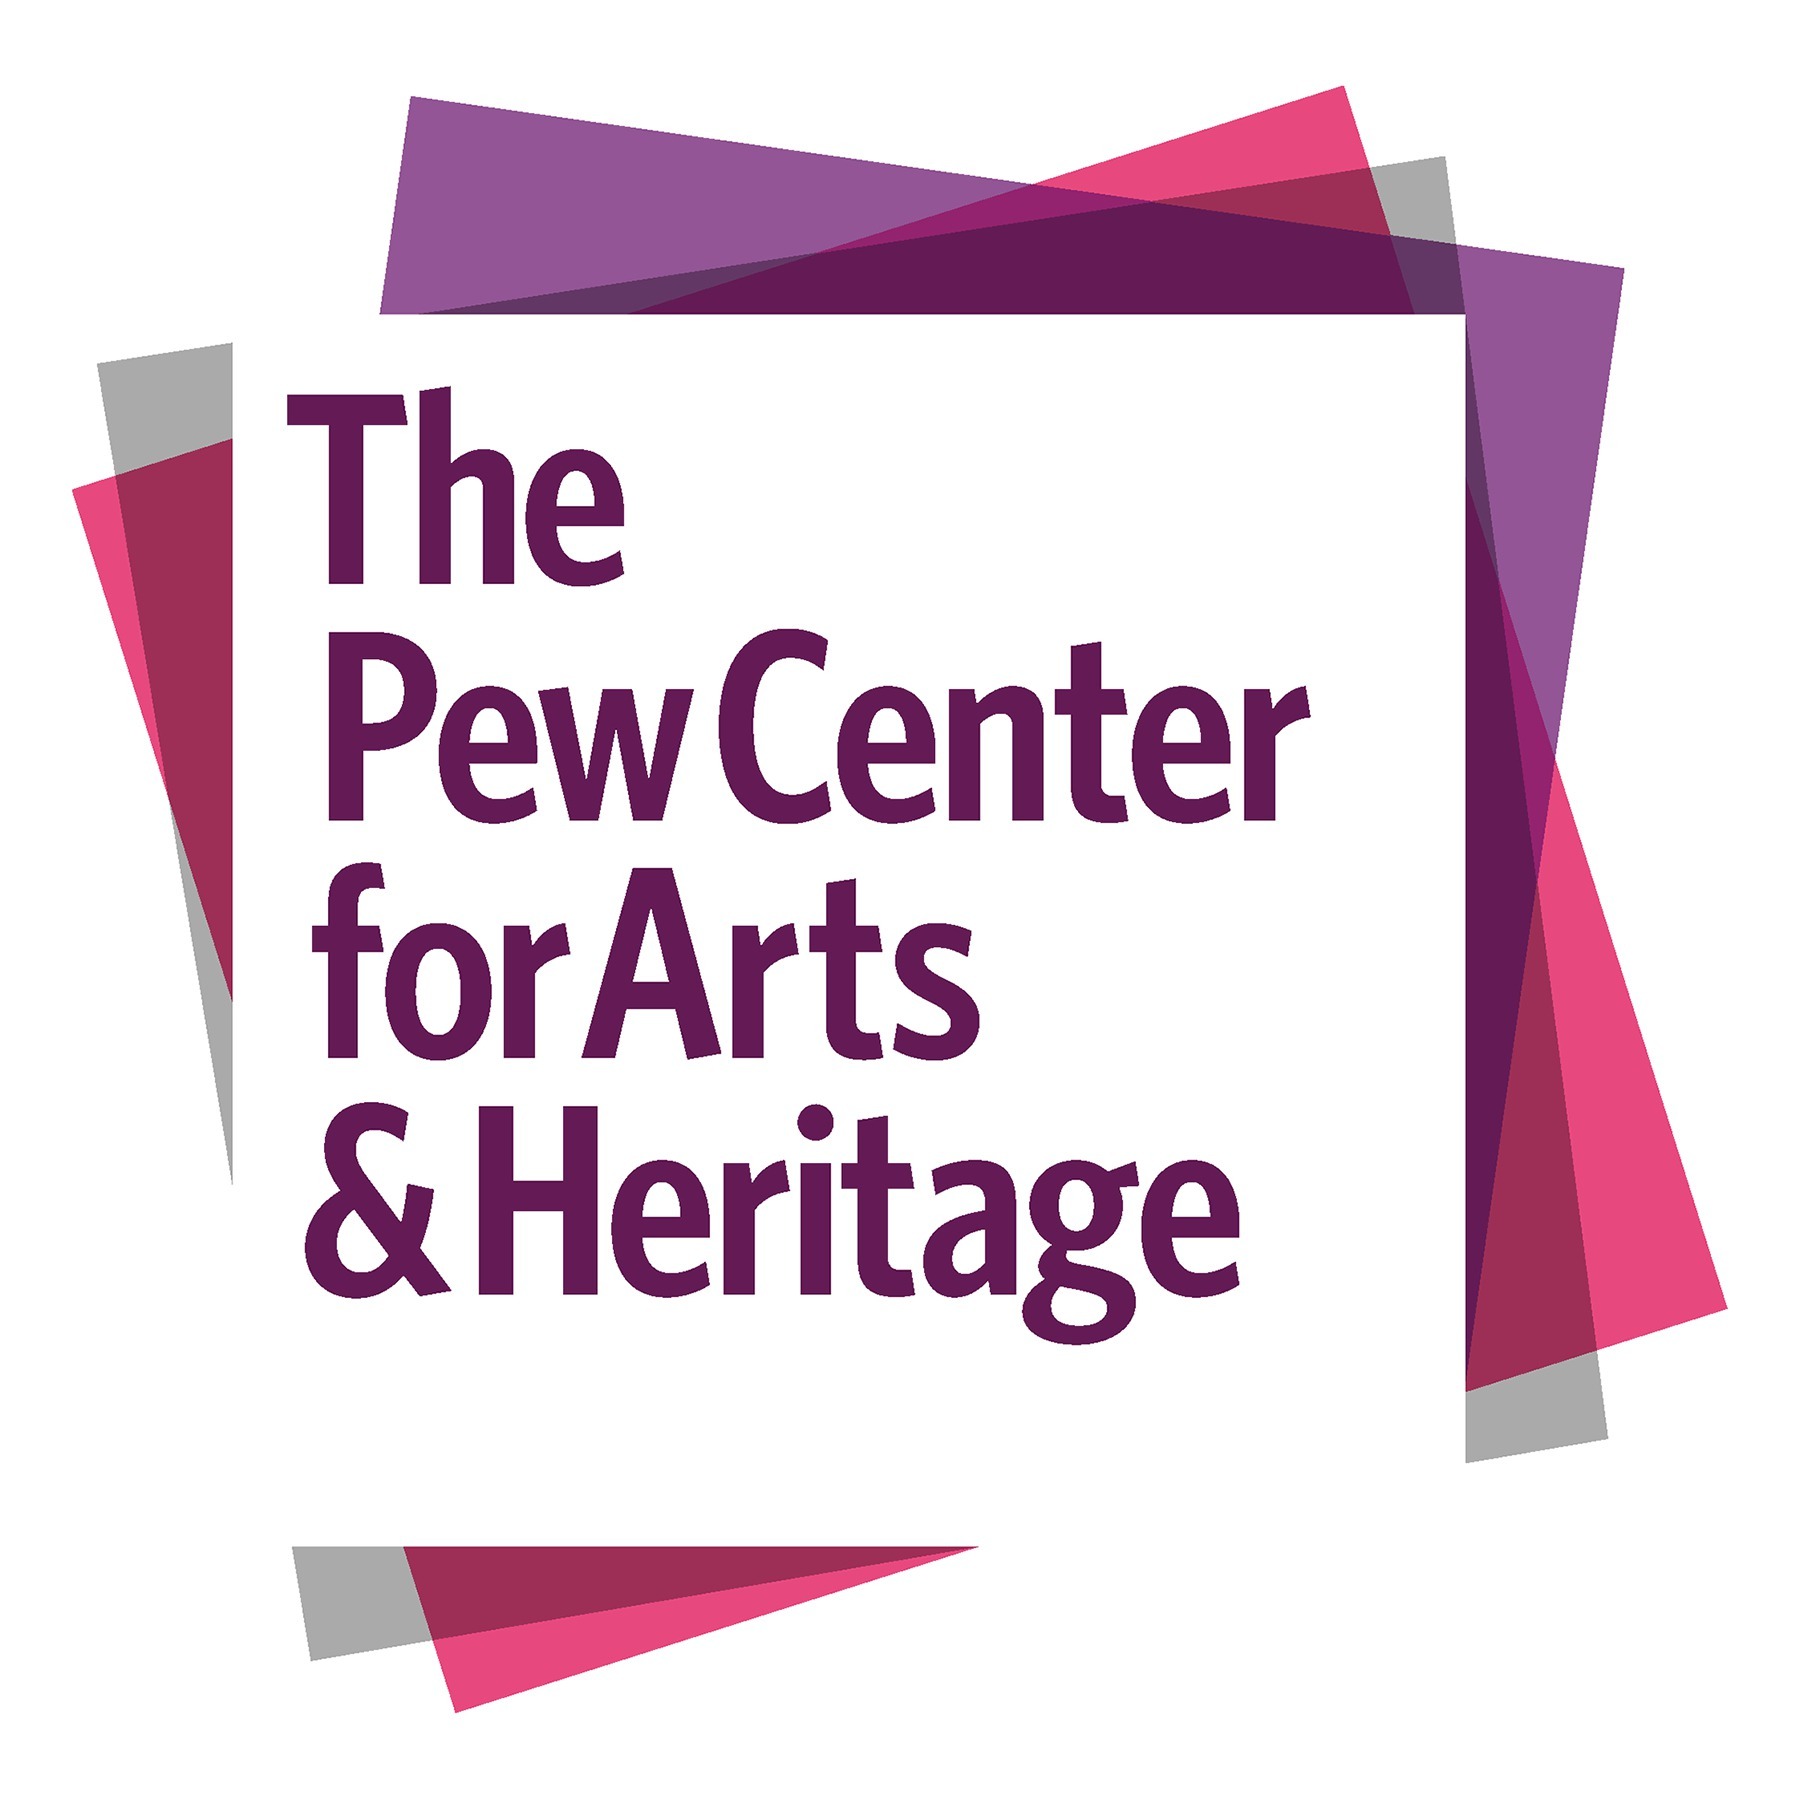 Departure and Discovery: New Directions at the Apex of Creativity is supported by The Pew Center for Arts & Heritage.